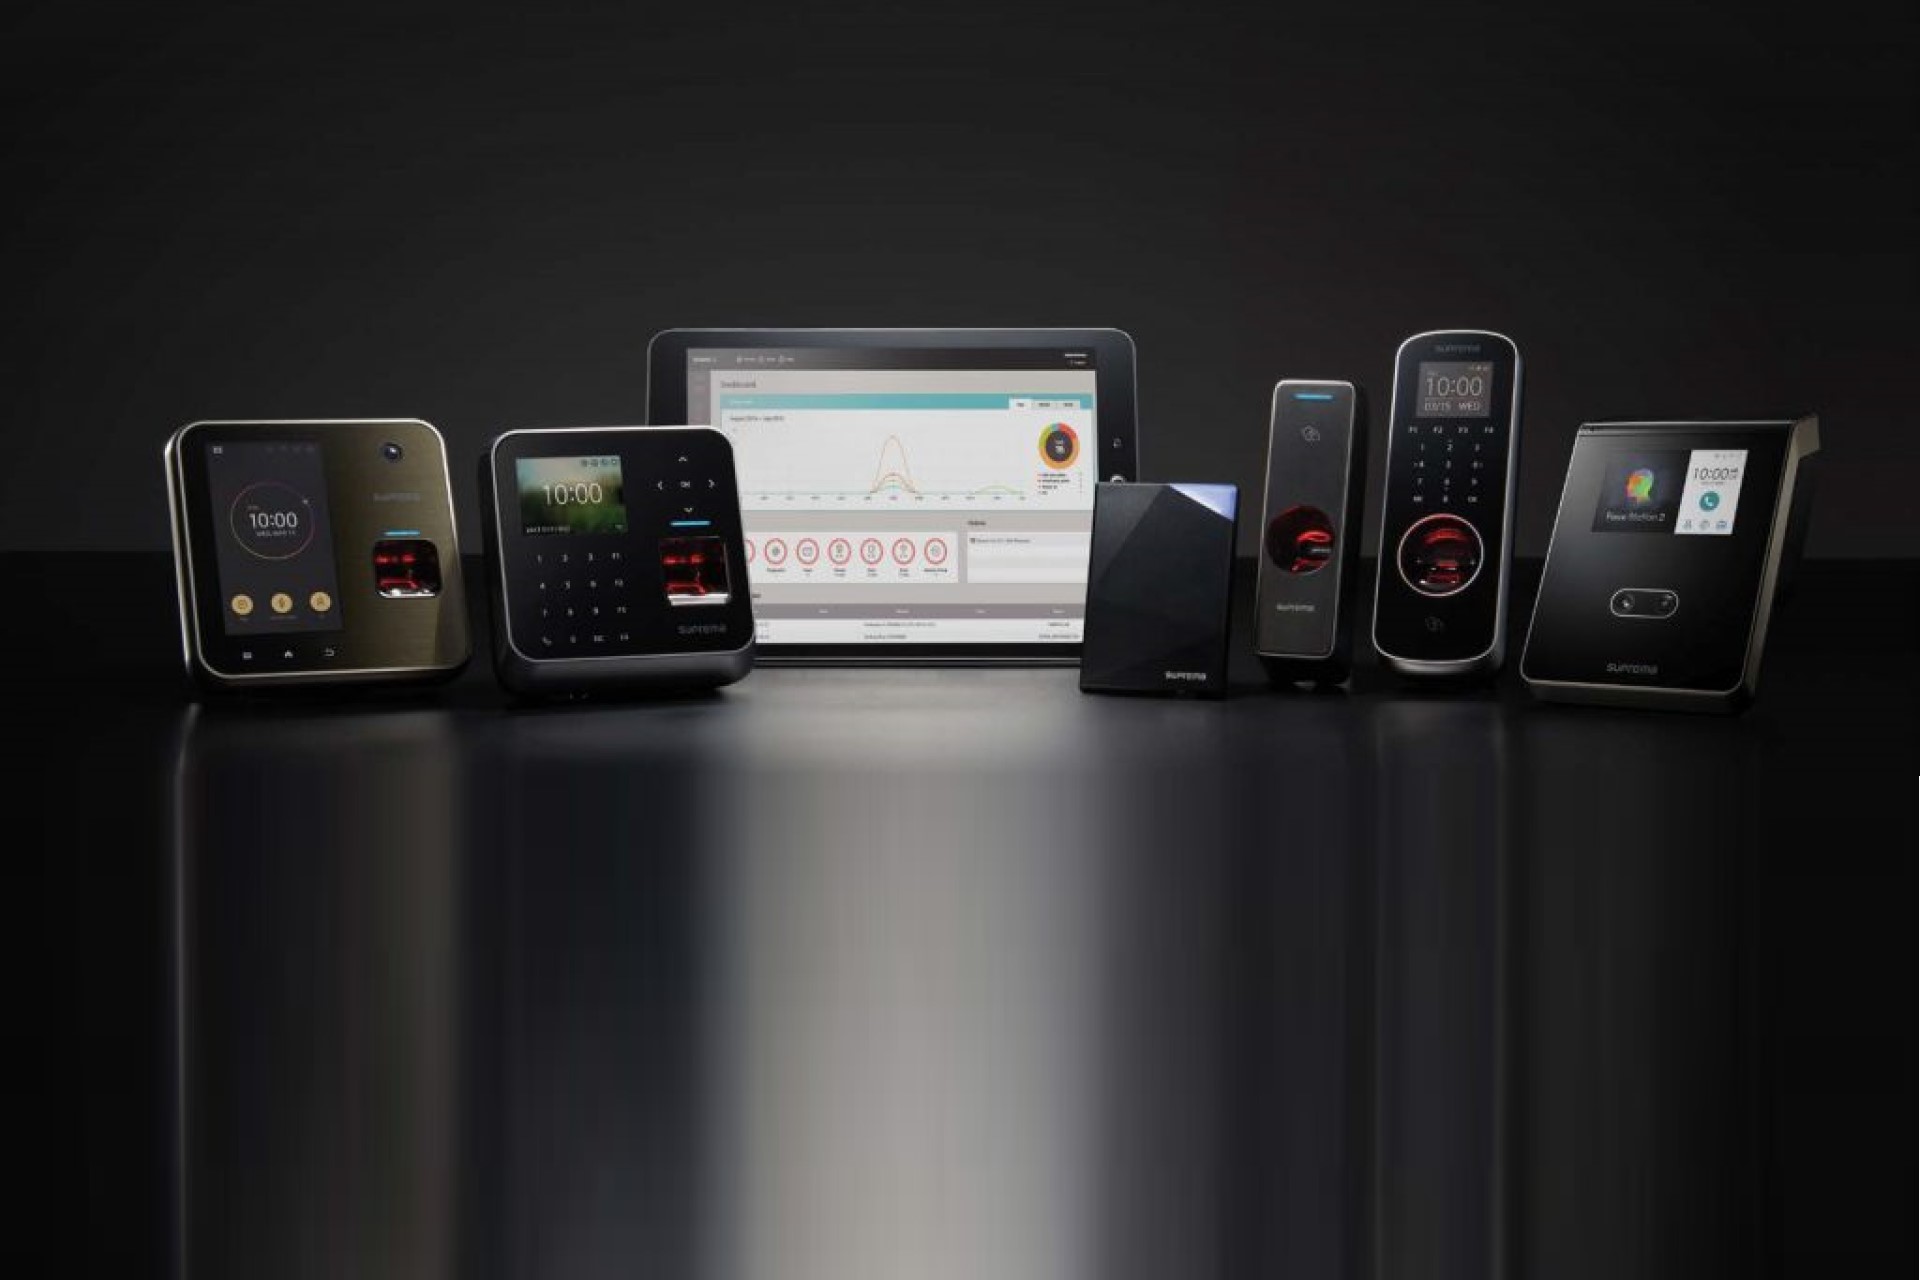 Security and access control systems